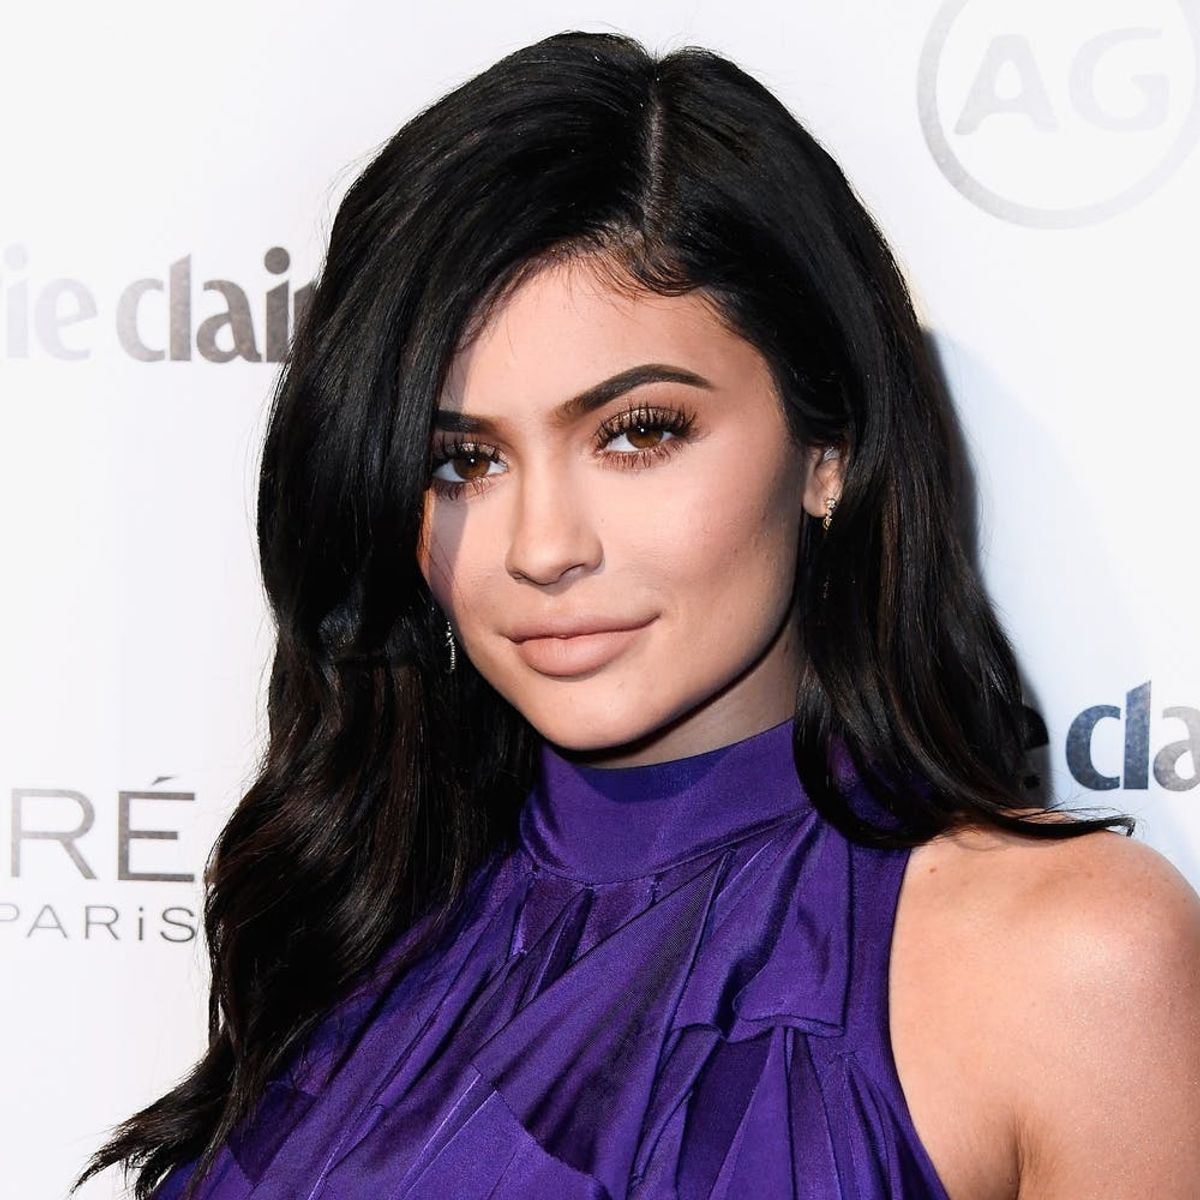 We Hardly Recognize Kylie Jenner With a Short Blonde Bob